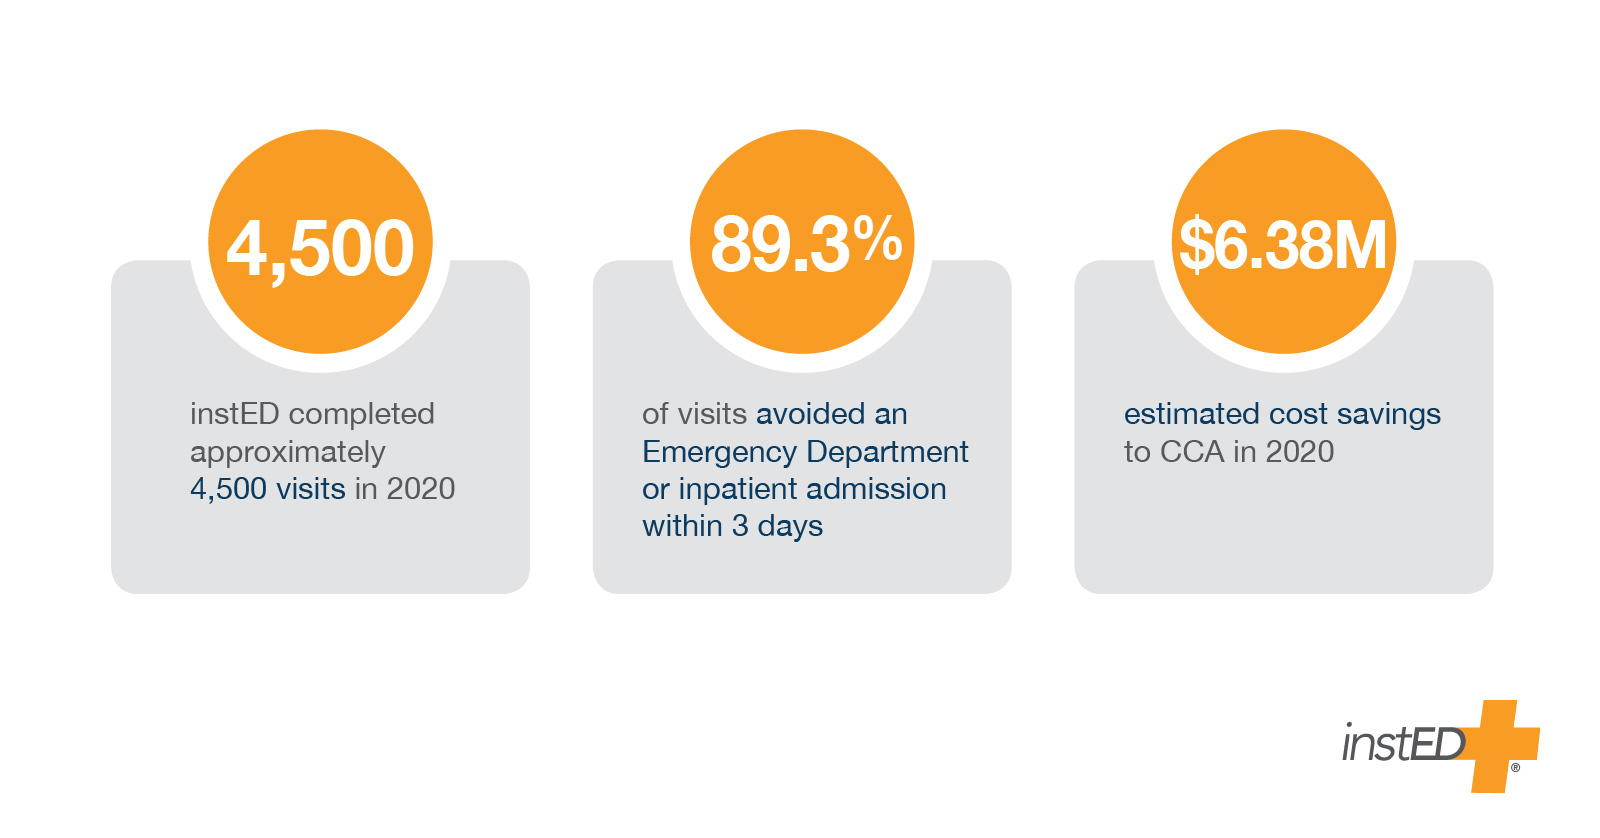 Graphic showing instED completed 4,500 visits in 2020; 89.3% of visits avoided an Emergency Department or inpatient admission within 3 days; and $6.38M estimated cost savings to CCA in 2020